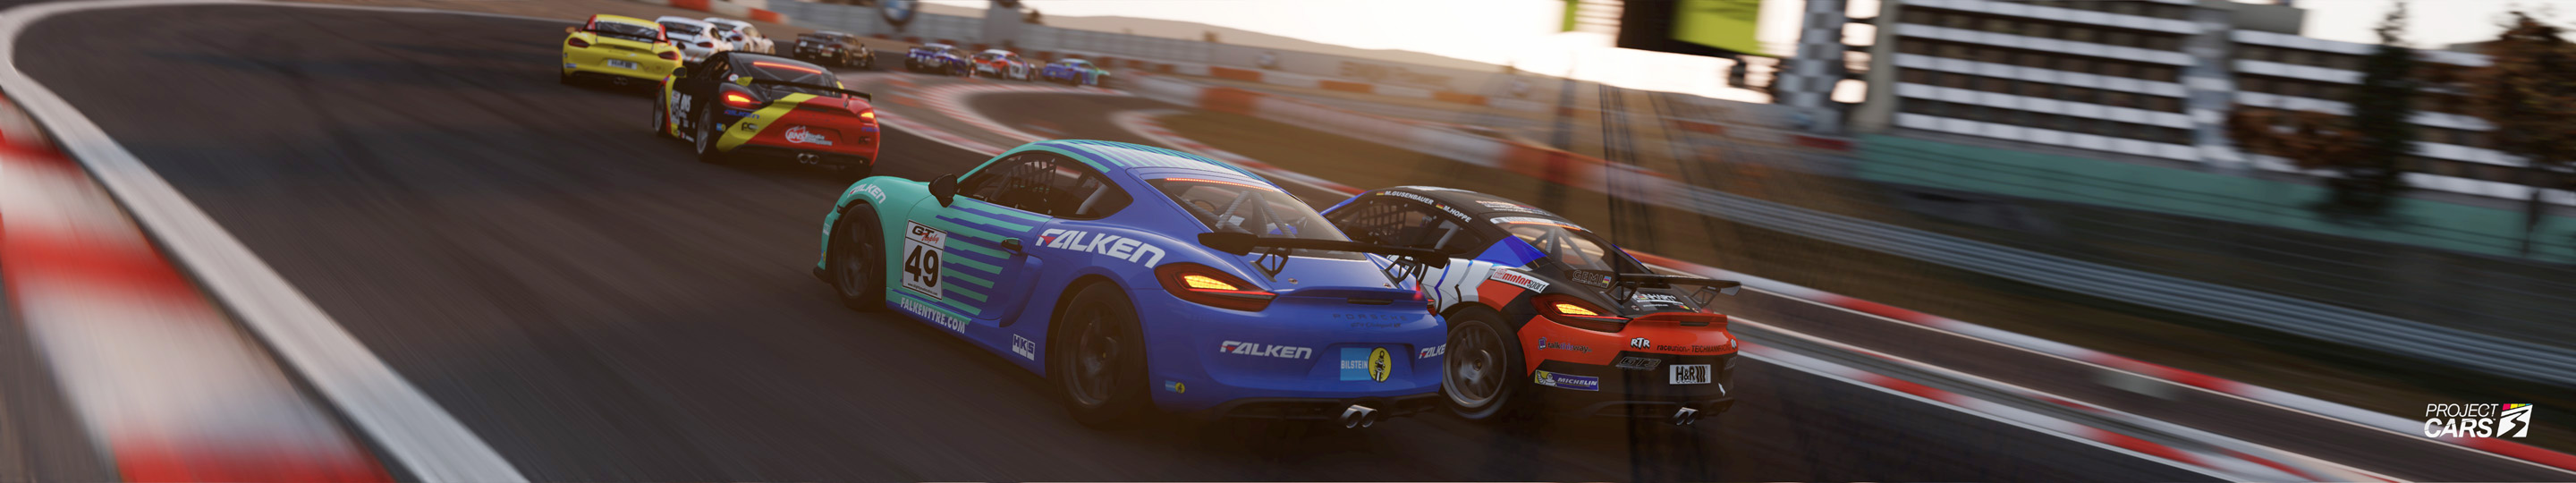 2 PROJECT CARS 3 PORSCHE Cayman GT4 at NURBURGRING copy.jpg